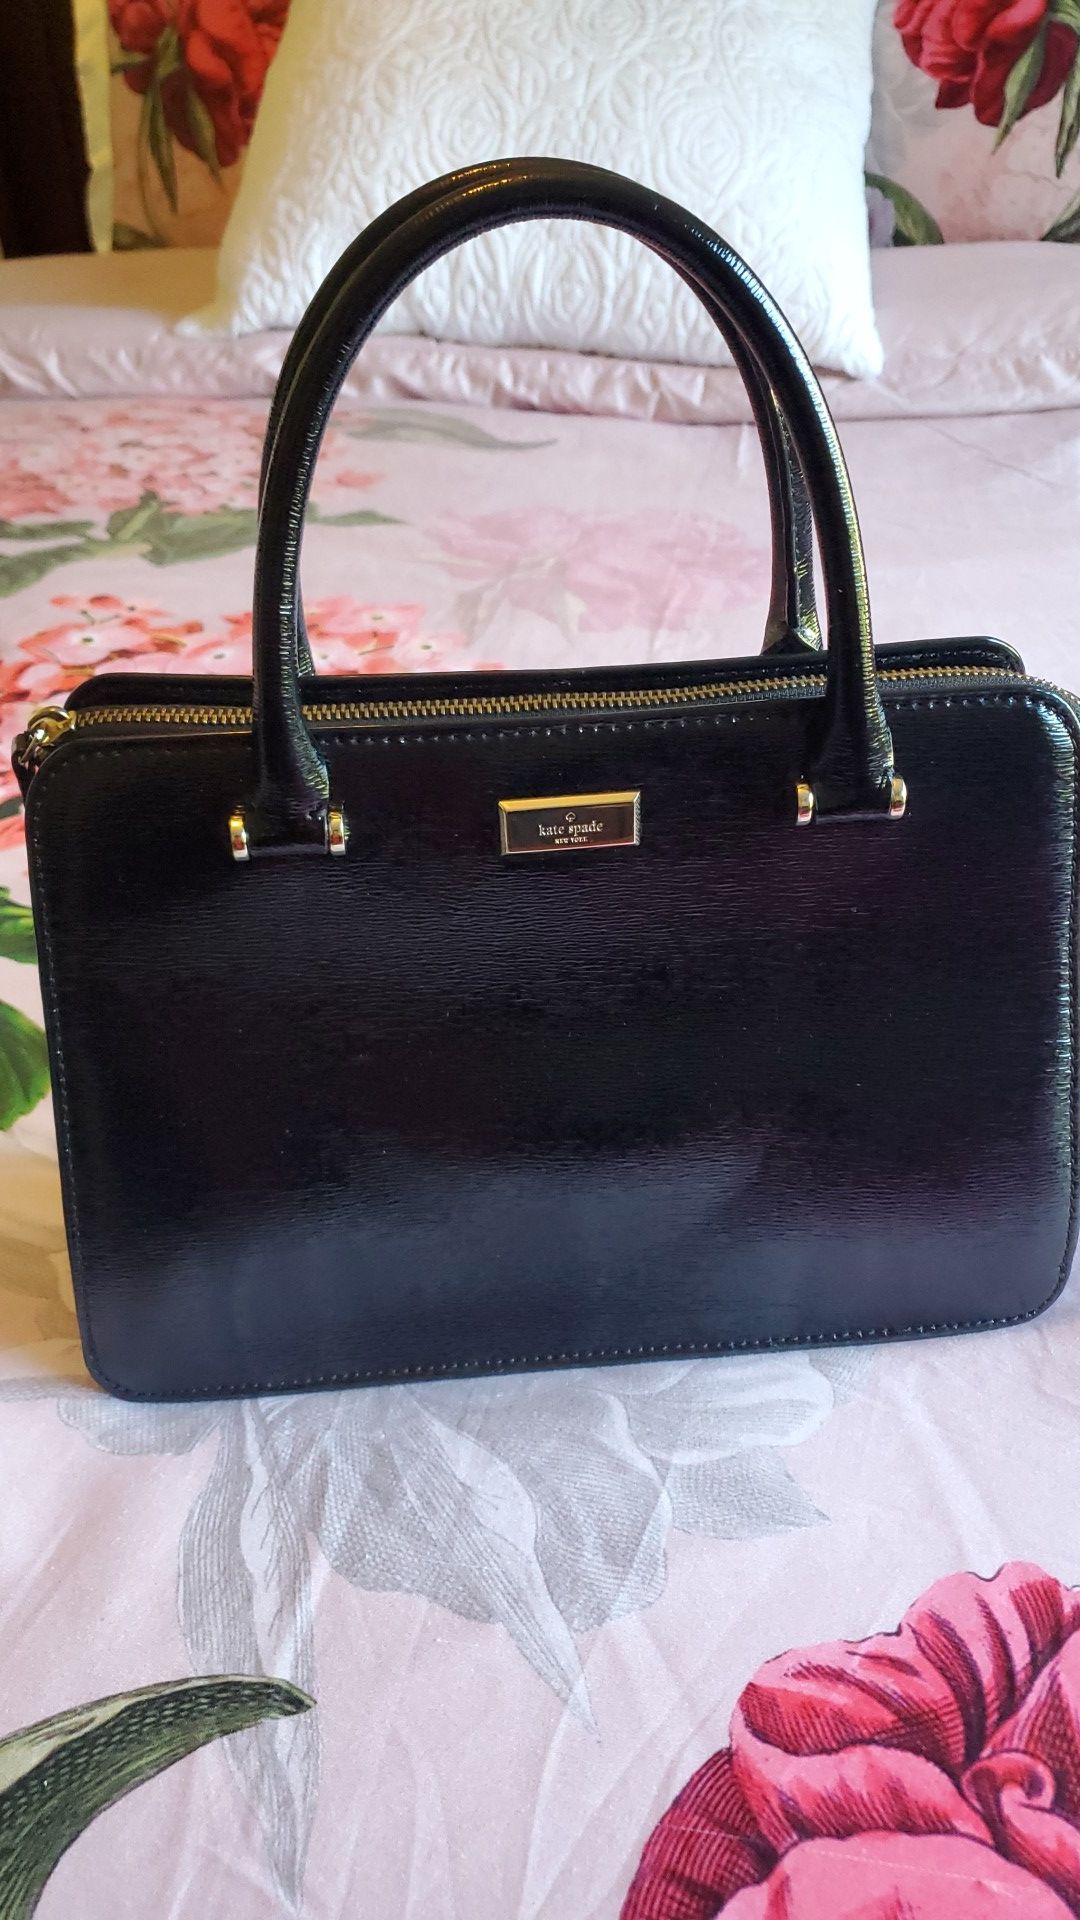 Authentic Kate Spade leather handbags